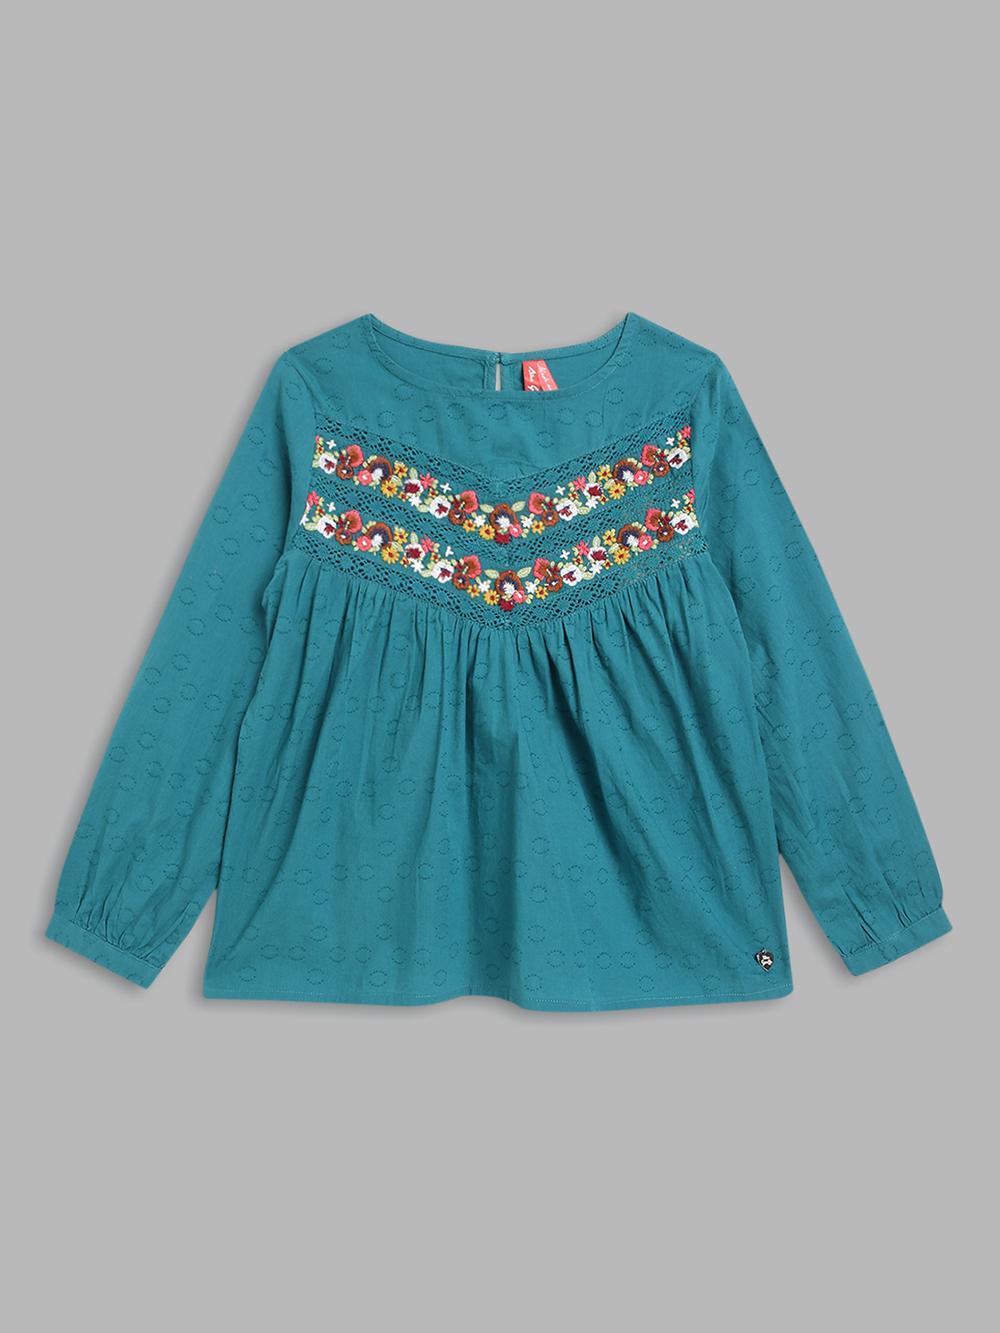 teal-embroidered-round-neck-top